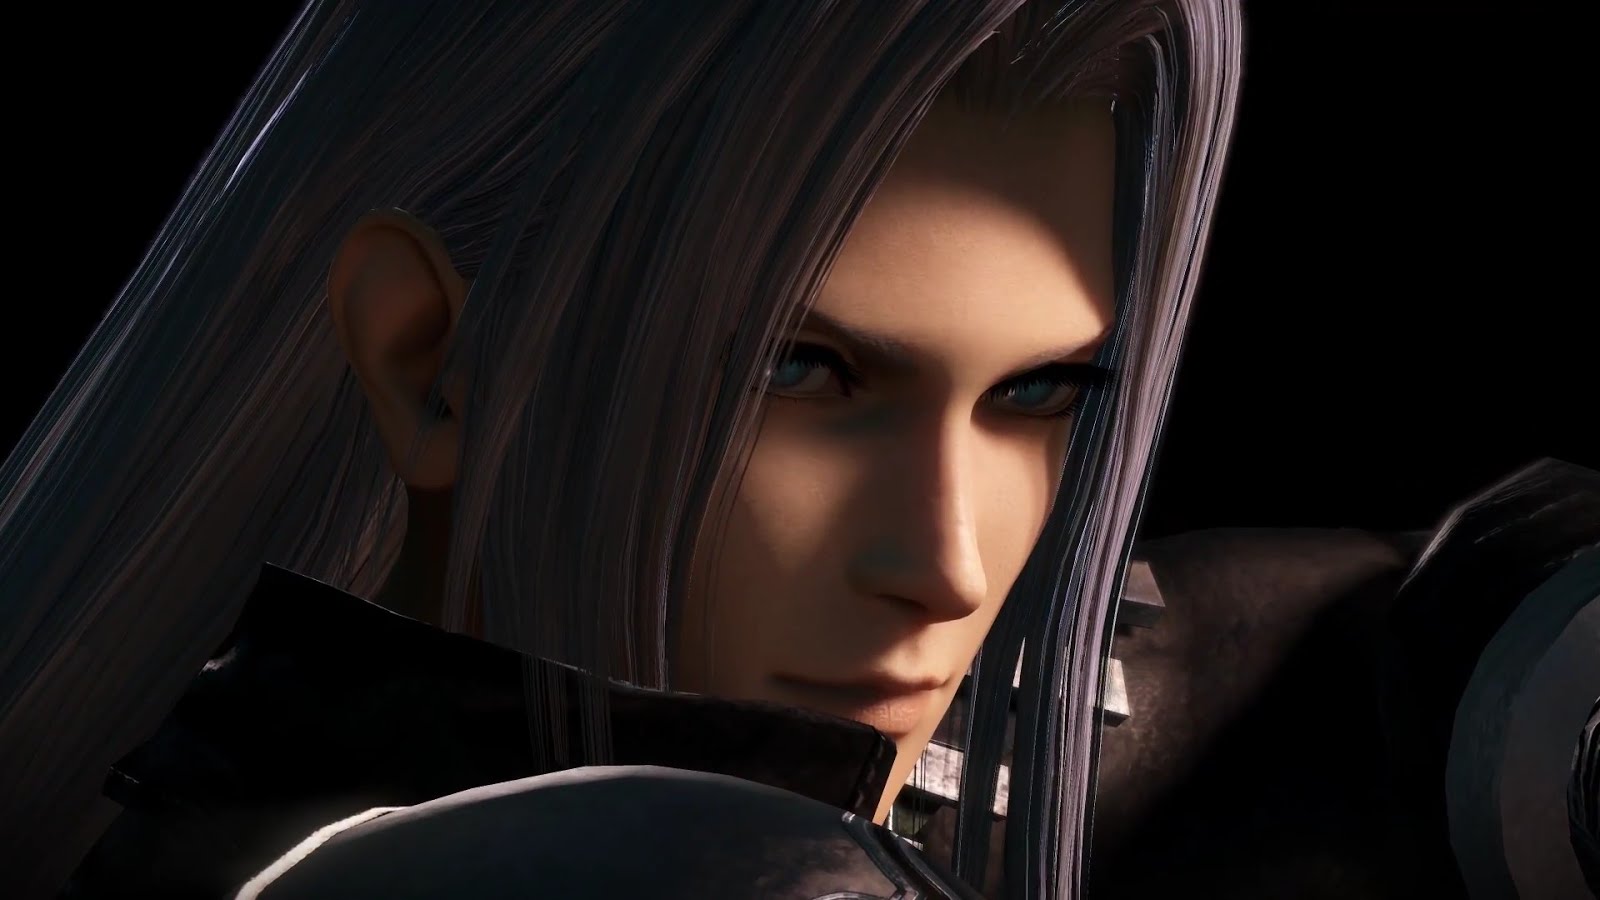 Sephiroth, confidently ready to take on his opposers.